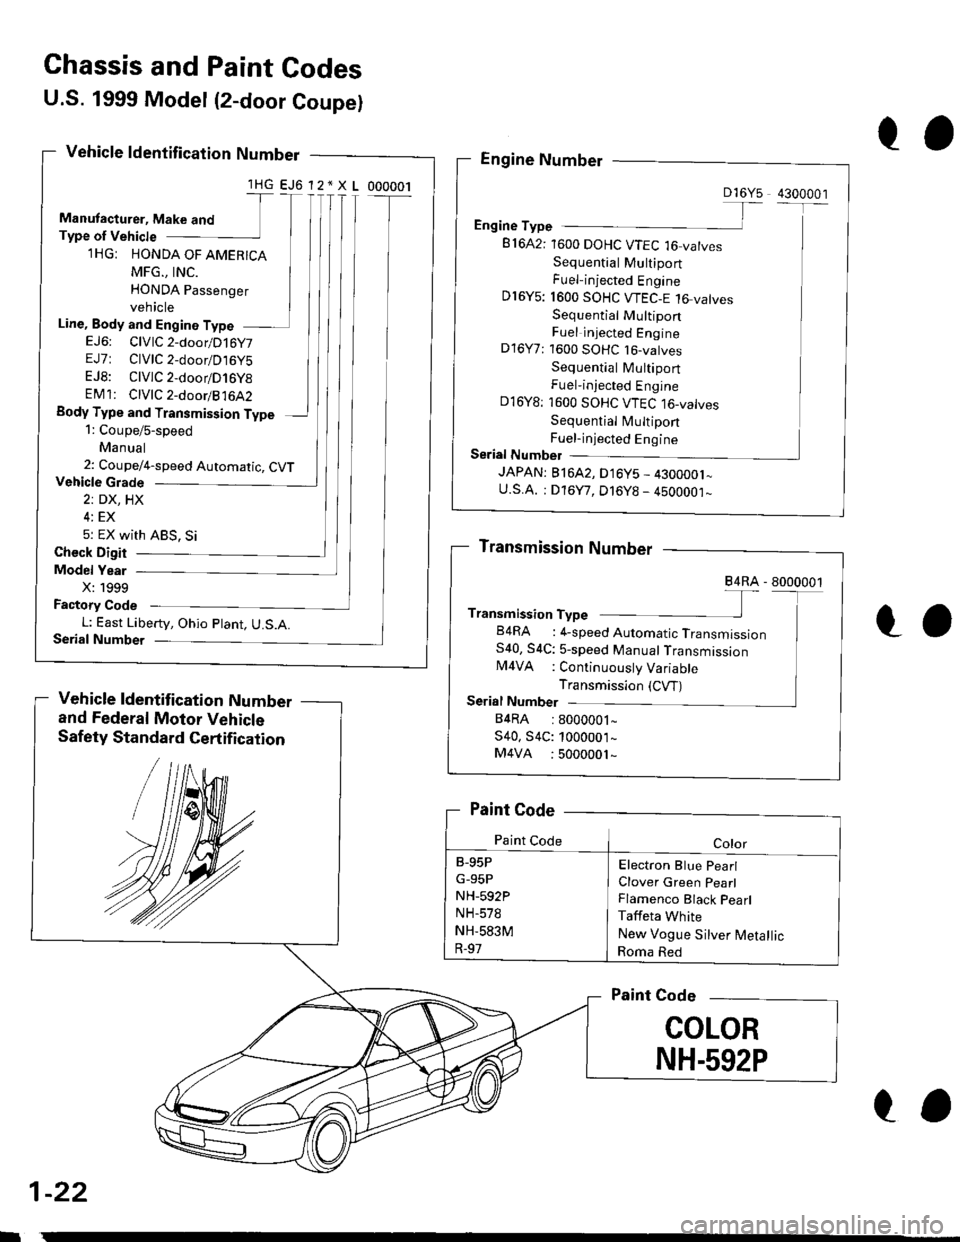 HONDA CIVIC 1996 6.G Workshop Manual Chassis and Paint Codes
Vehicle Grade
2: DX, HX
4: EX
5: EX With ABS, Si
Check Digit
Model Year
X:1999
Factory Code
L: East Liberty, Ohio Plant, U.S.A.Serial Number
Vehicle ldentification Number
and F